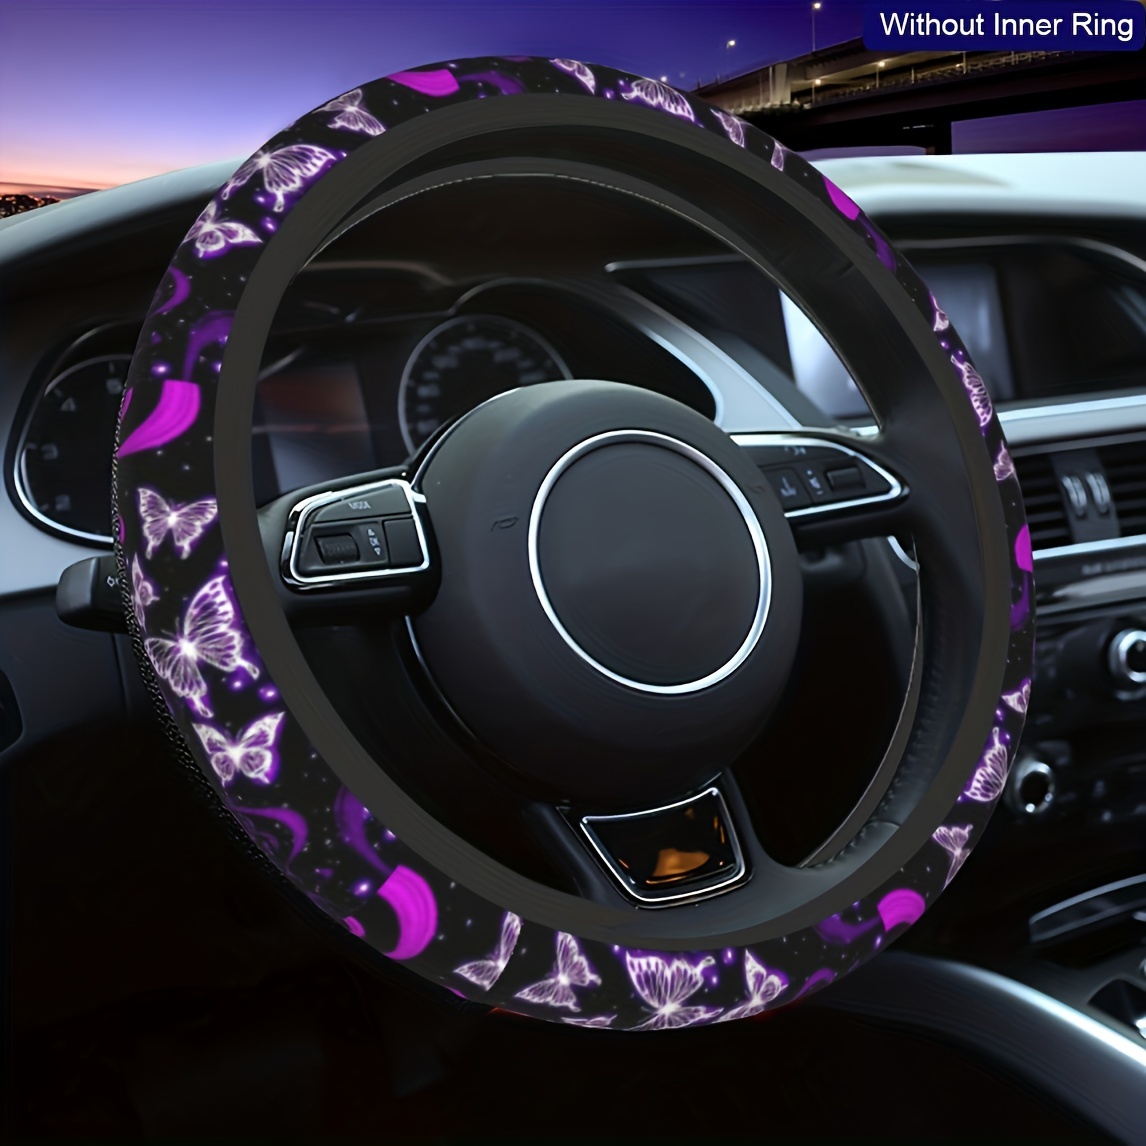 

1pc Purple Butterfly Car Steering Wheel Cover - Universal 15 Inch Anti-slip Car Steering Wheel Protector Cover For Women, Car Interior Accessories